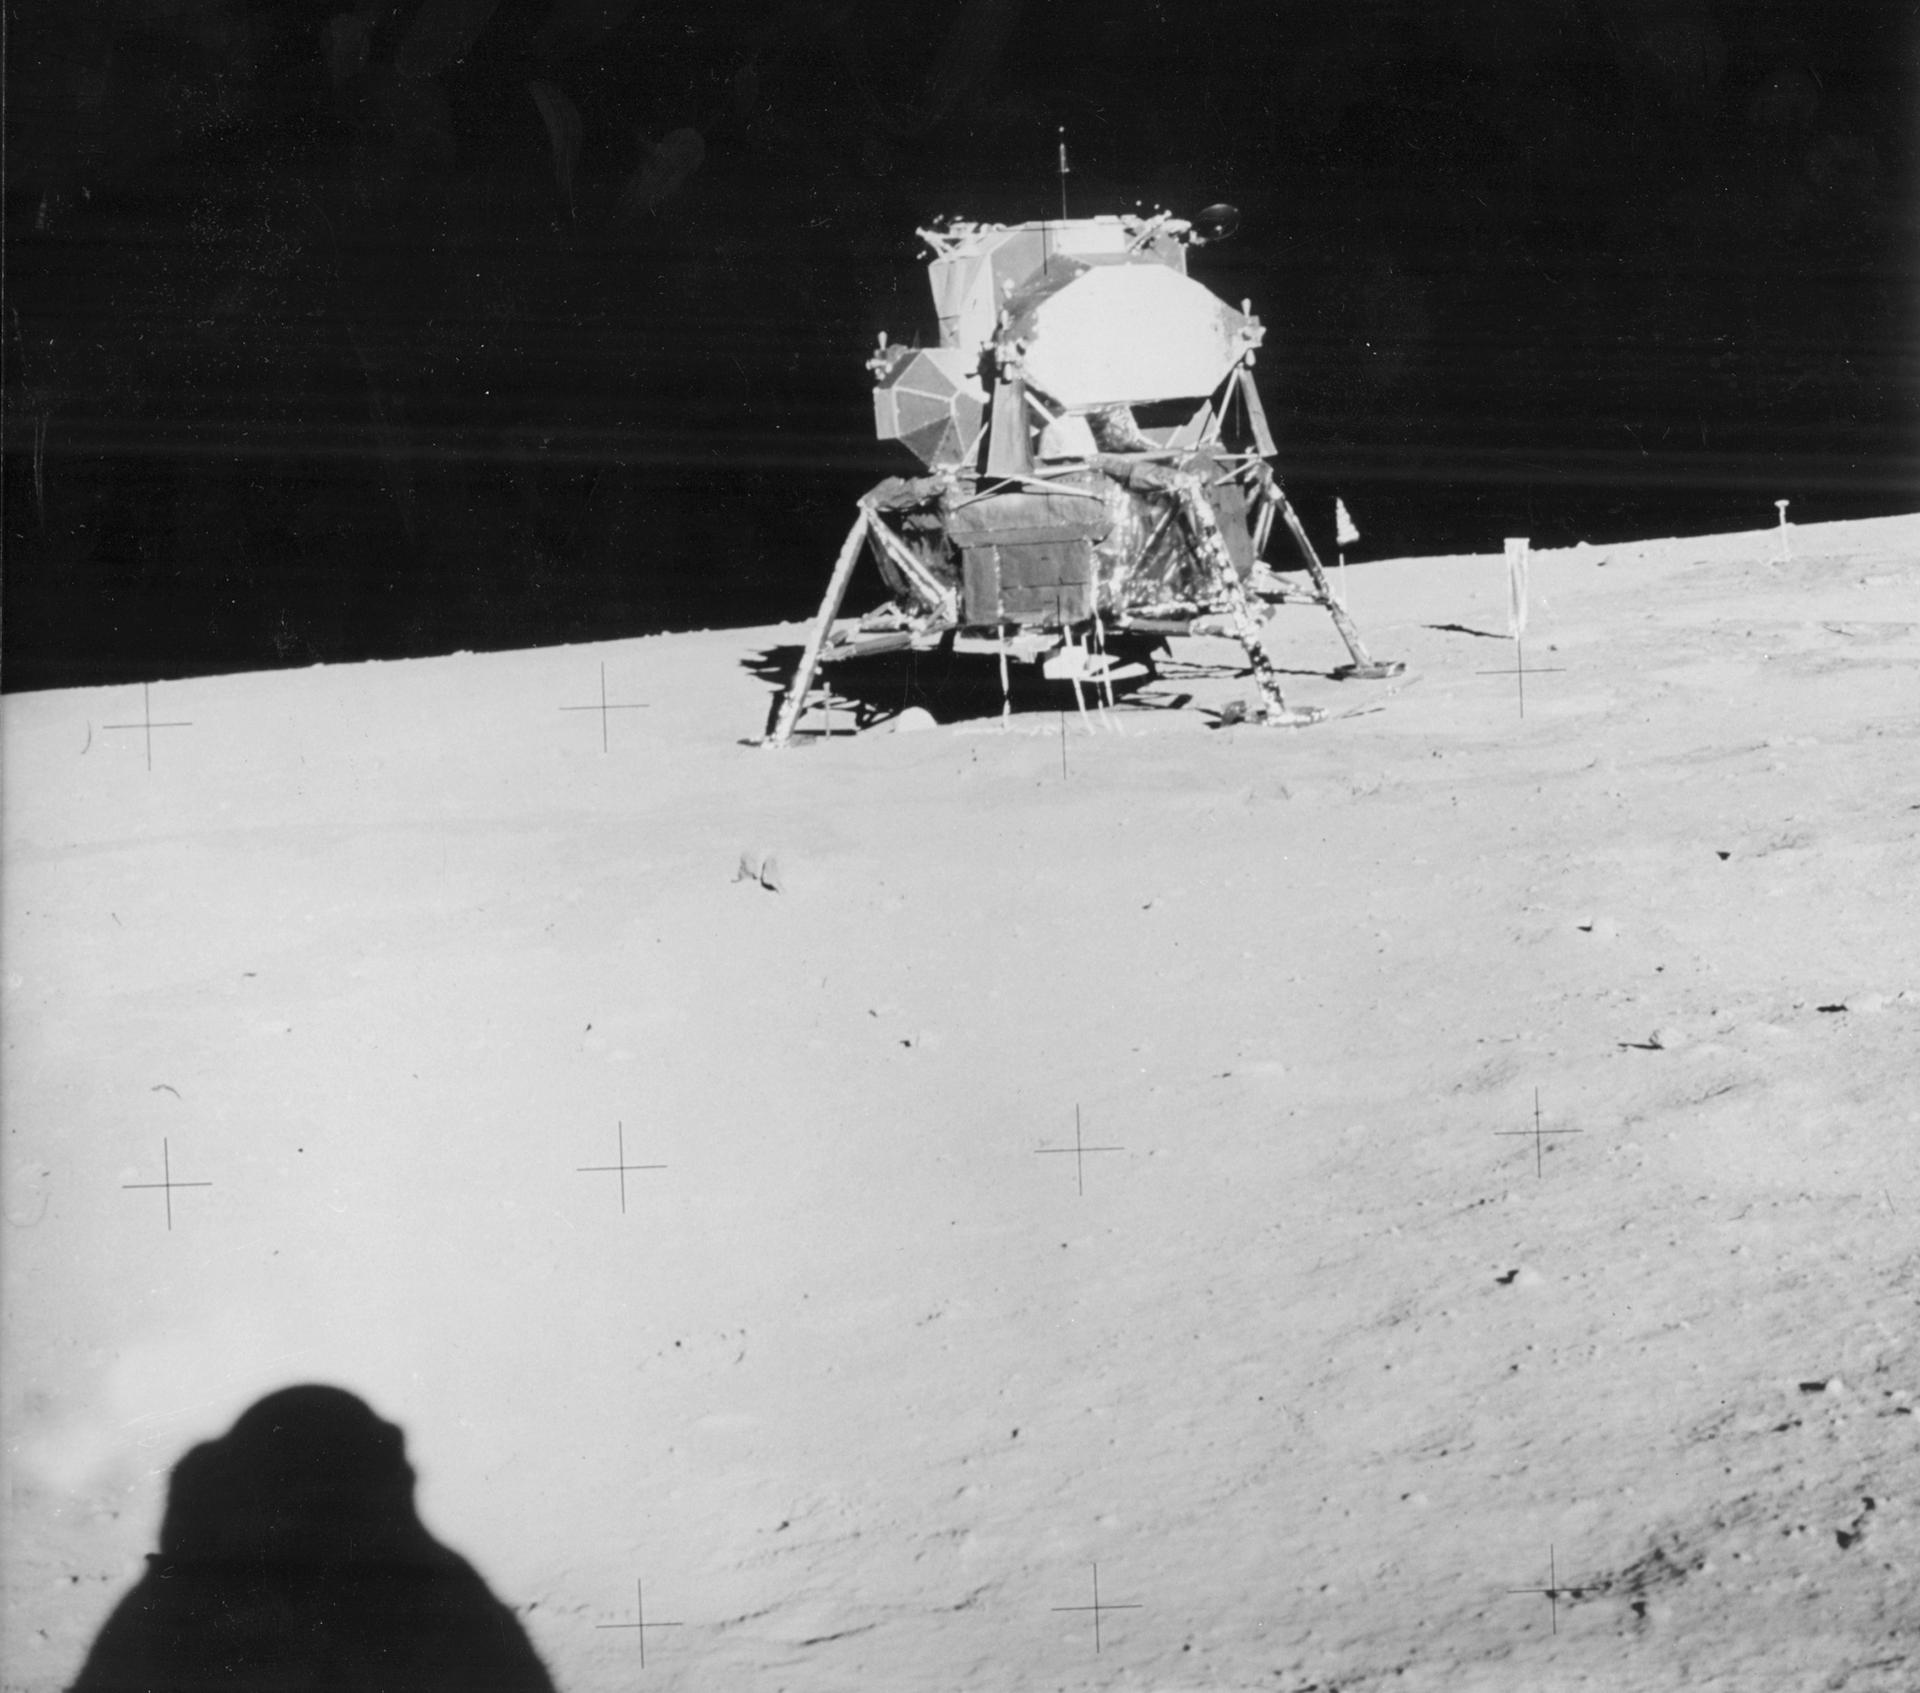 The Apollo 11's lunar module landed on the moon